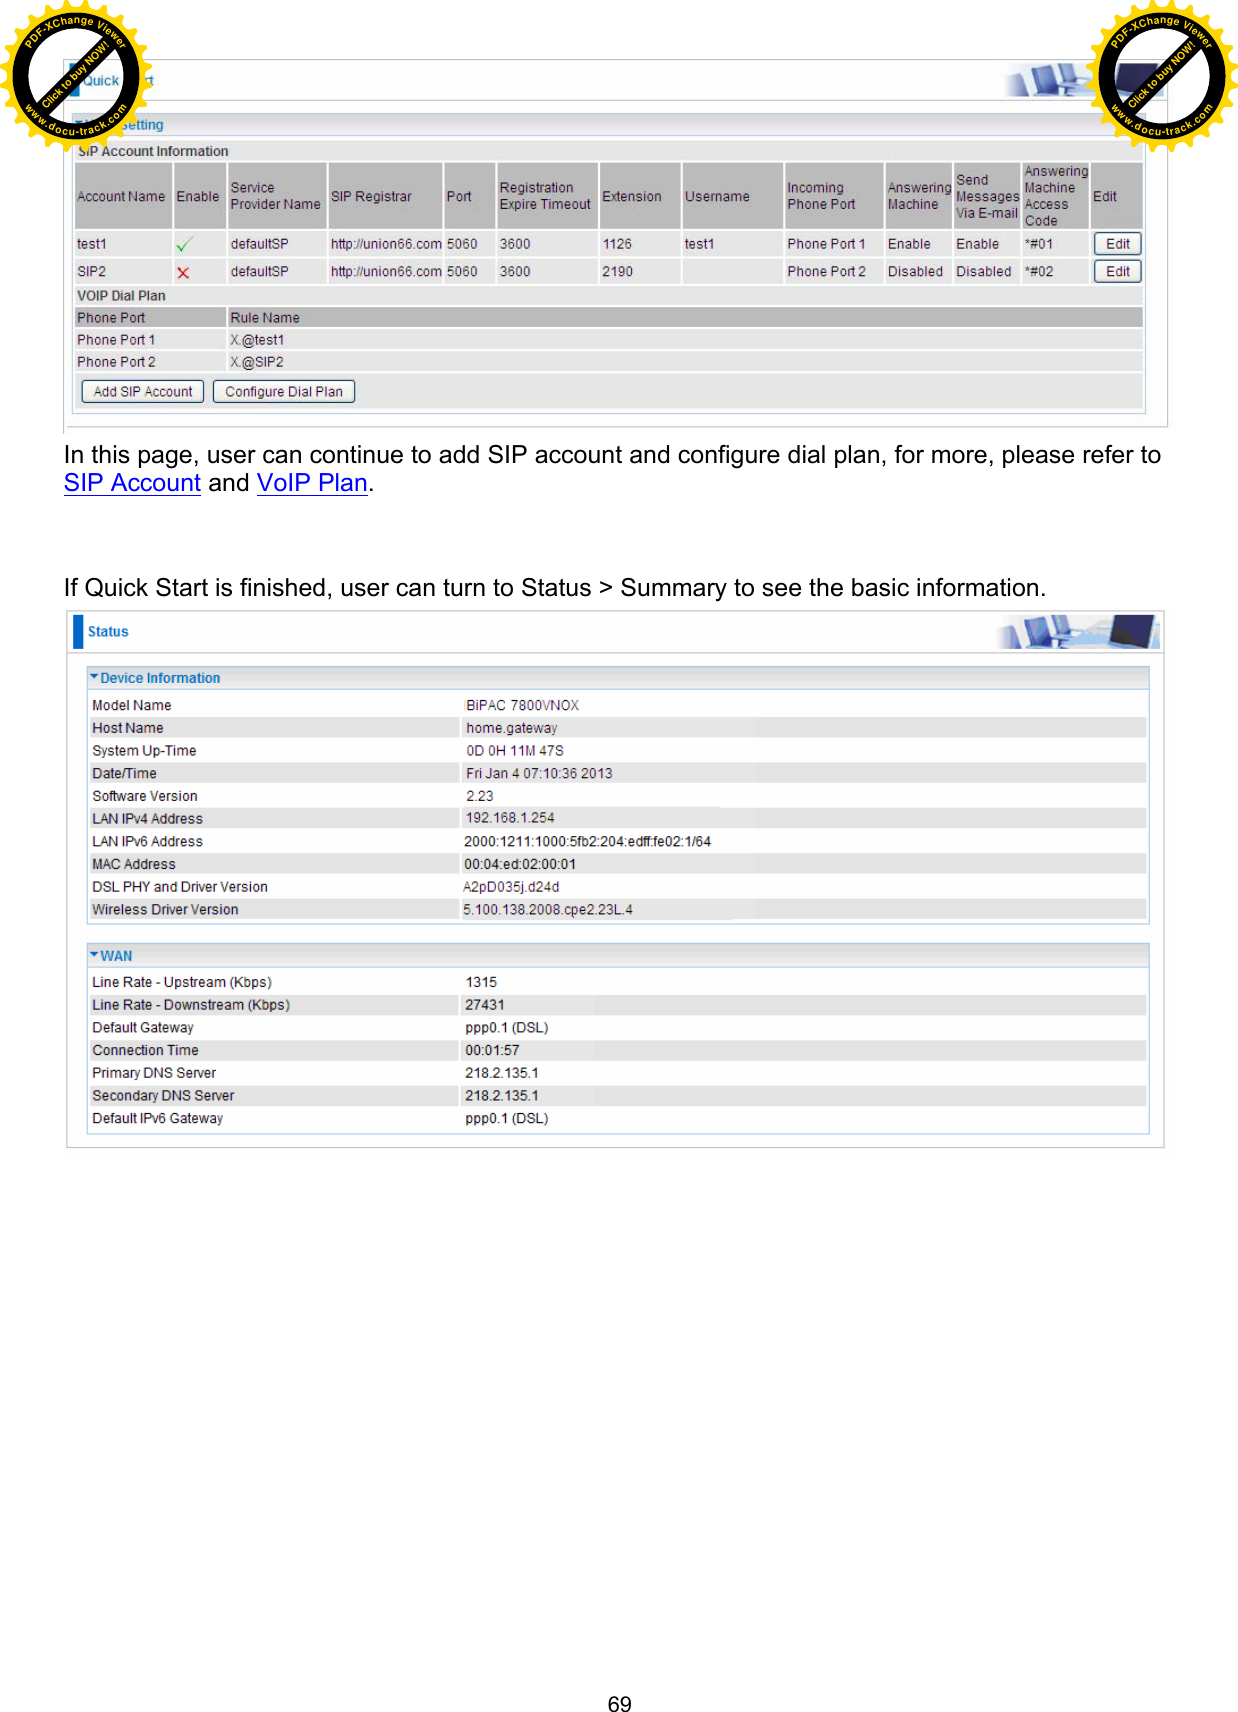  69  In this page, user can continue to add SIP account and configure dial plan, for more, please refer to SIP Account and VoIP Plan.   If Quick Start is finished, user can turn to Status &gt; Summary to see the basic information.  Click to buy NOW!PDF-XChange Viewerwww.docu-track.comClick to buy NOW!PDF-XChange Viewerwww.docu-track.com